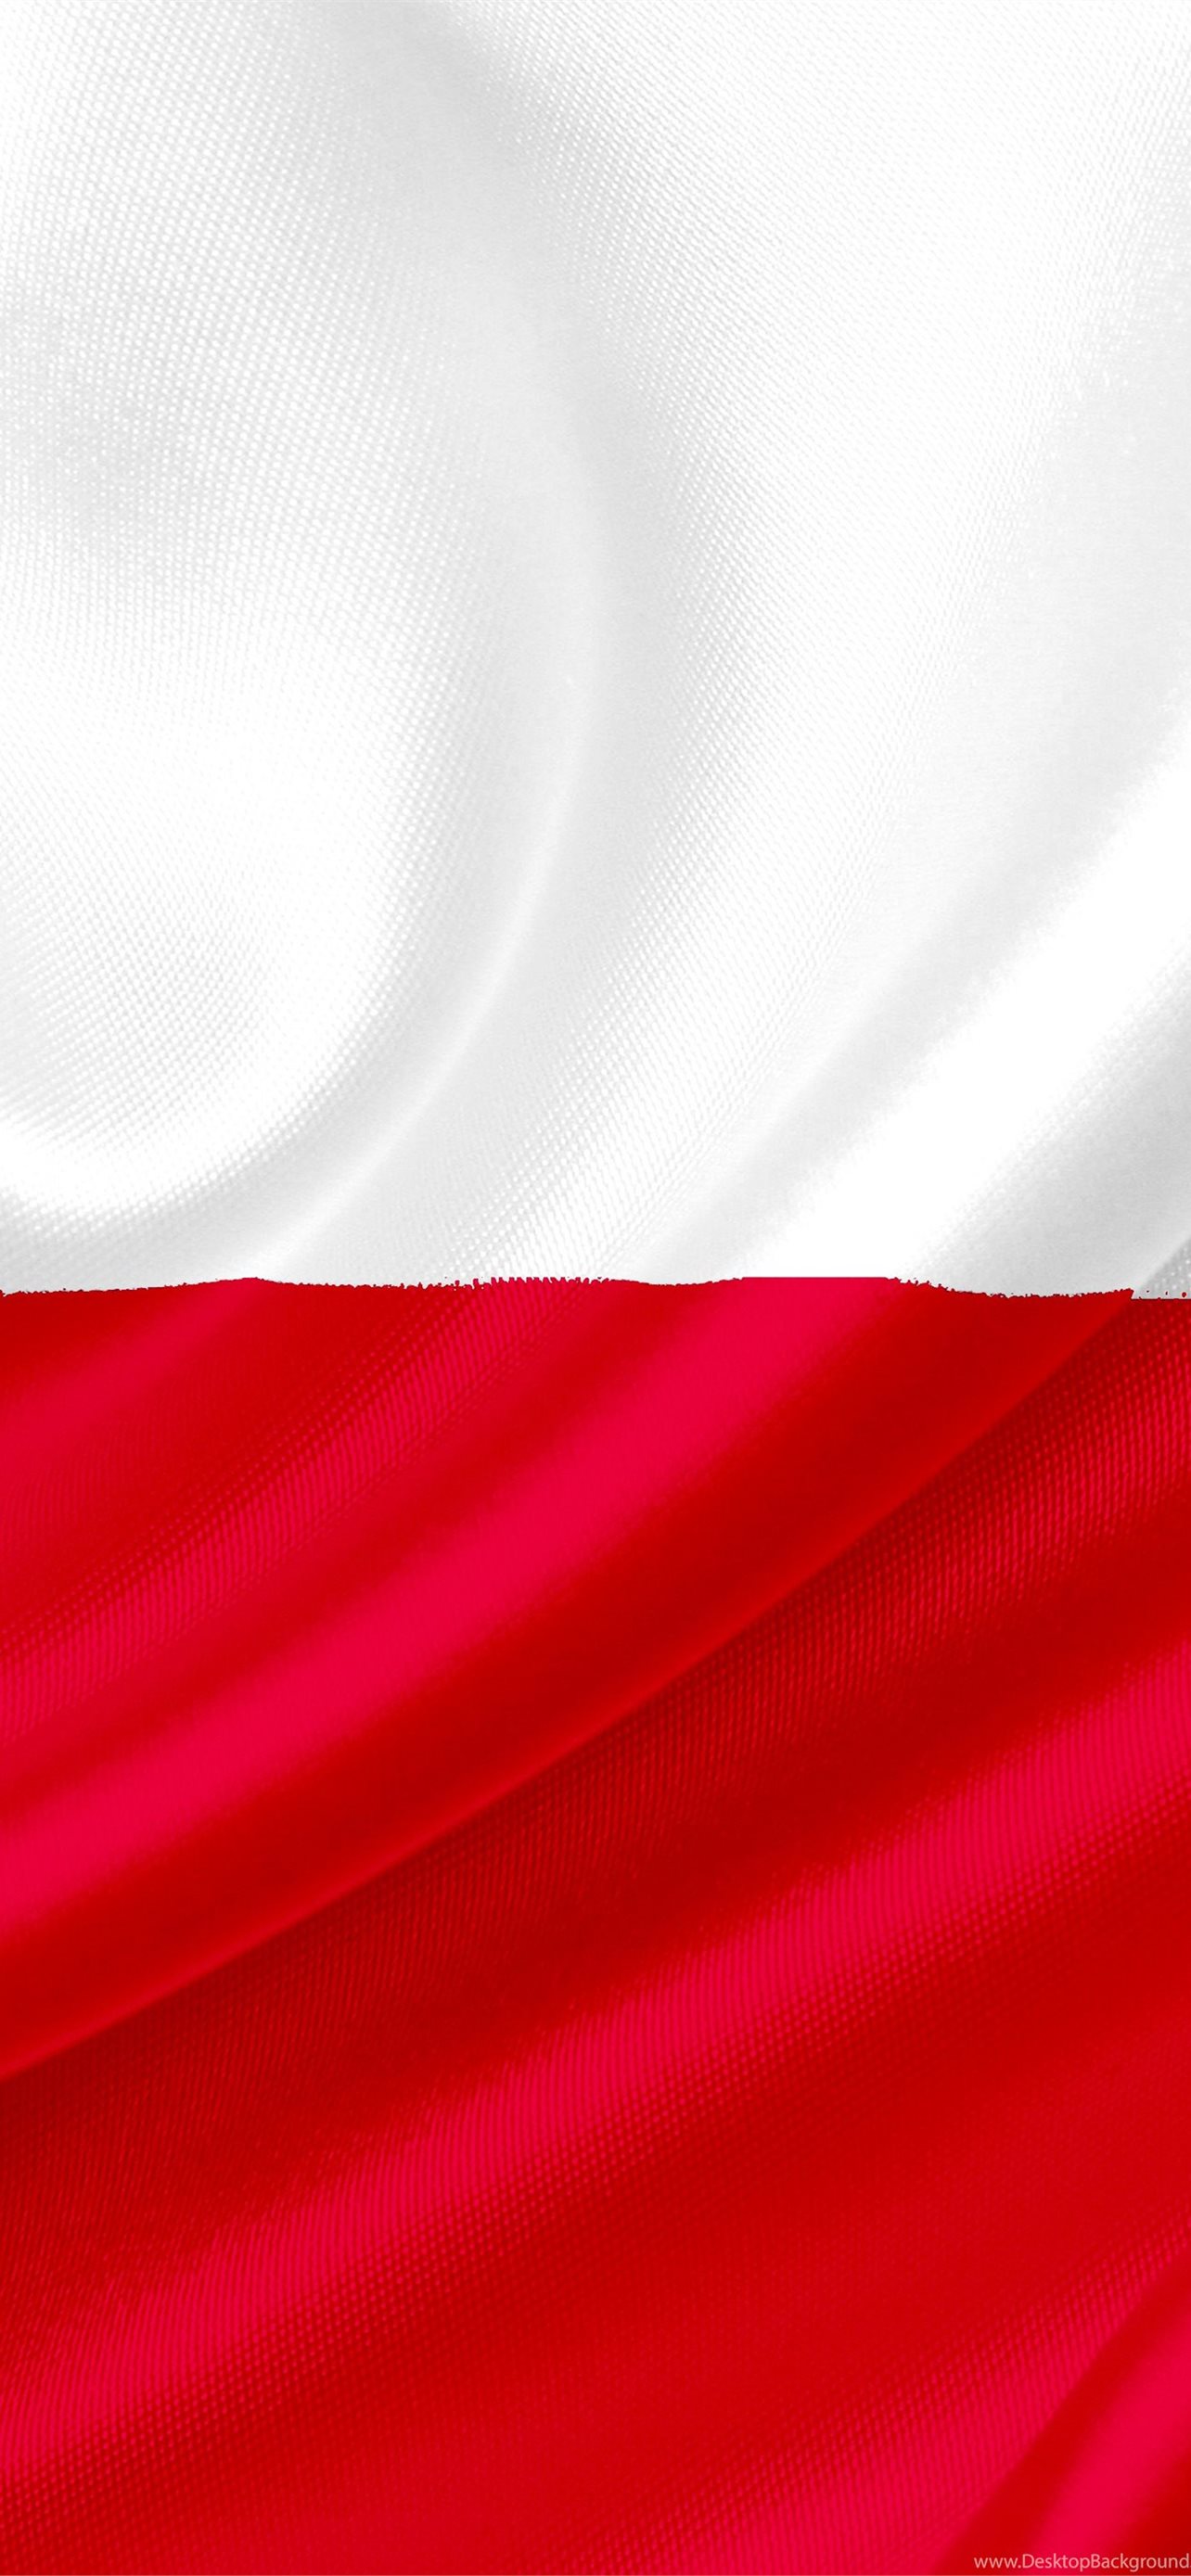 Poland flag iphone wallpapers free download